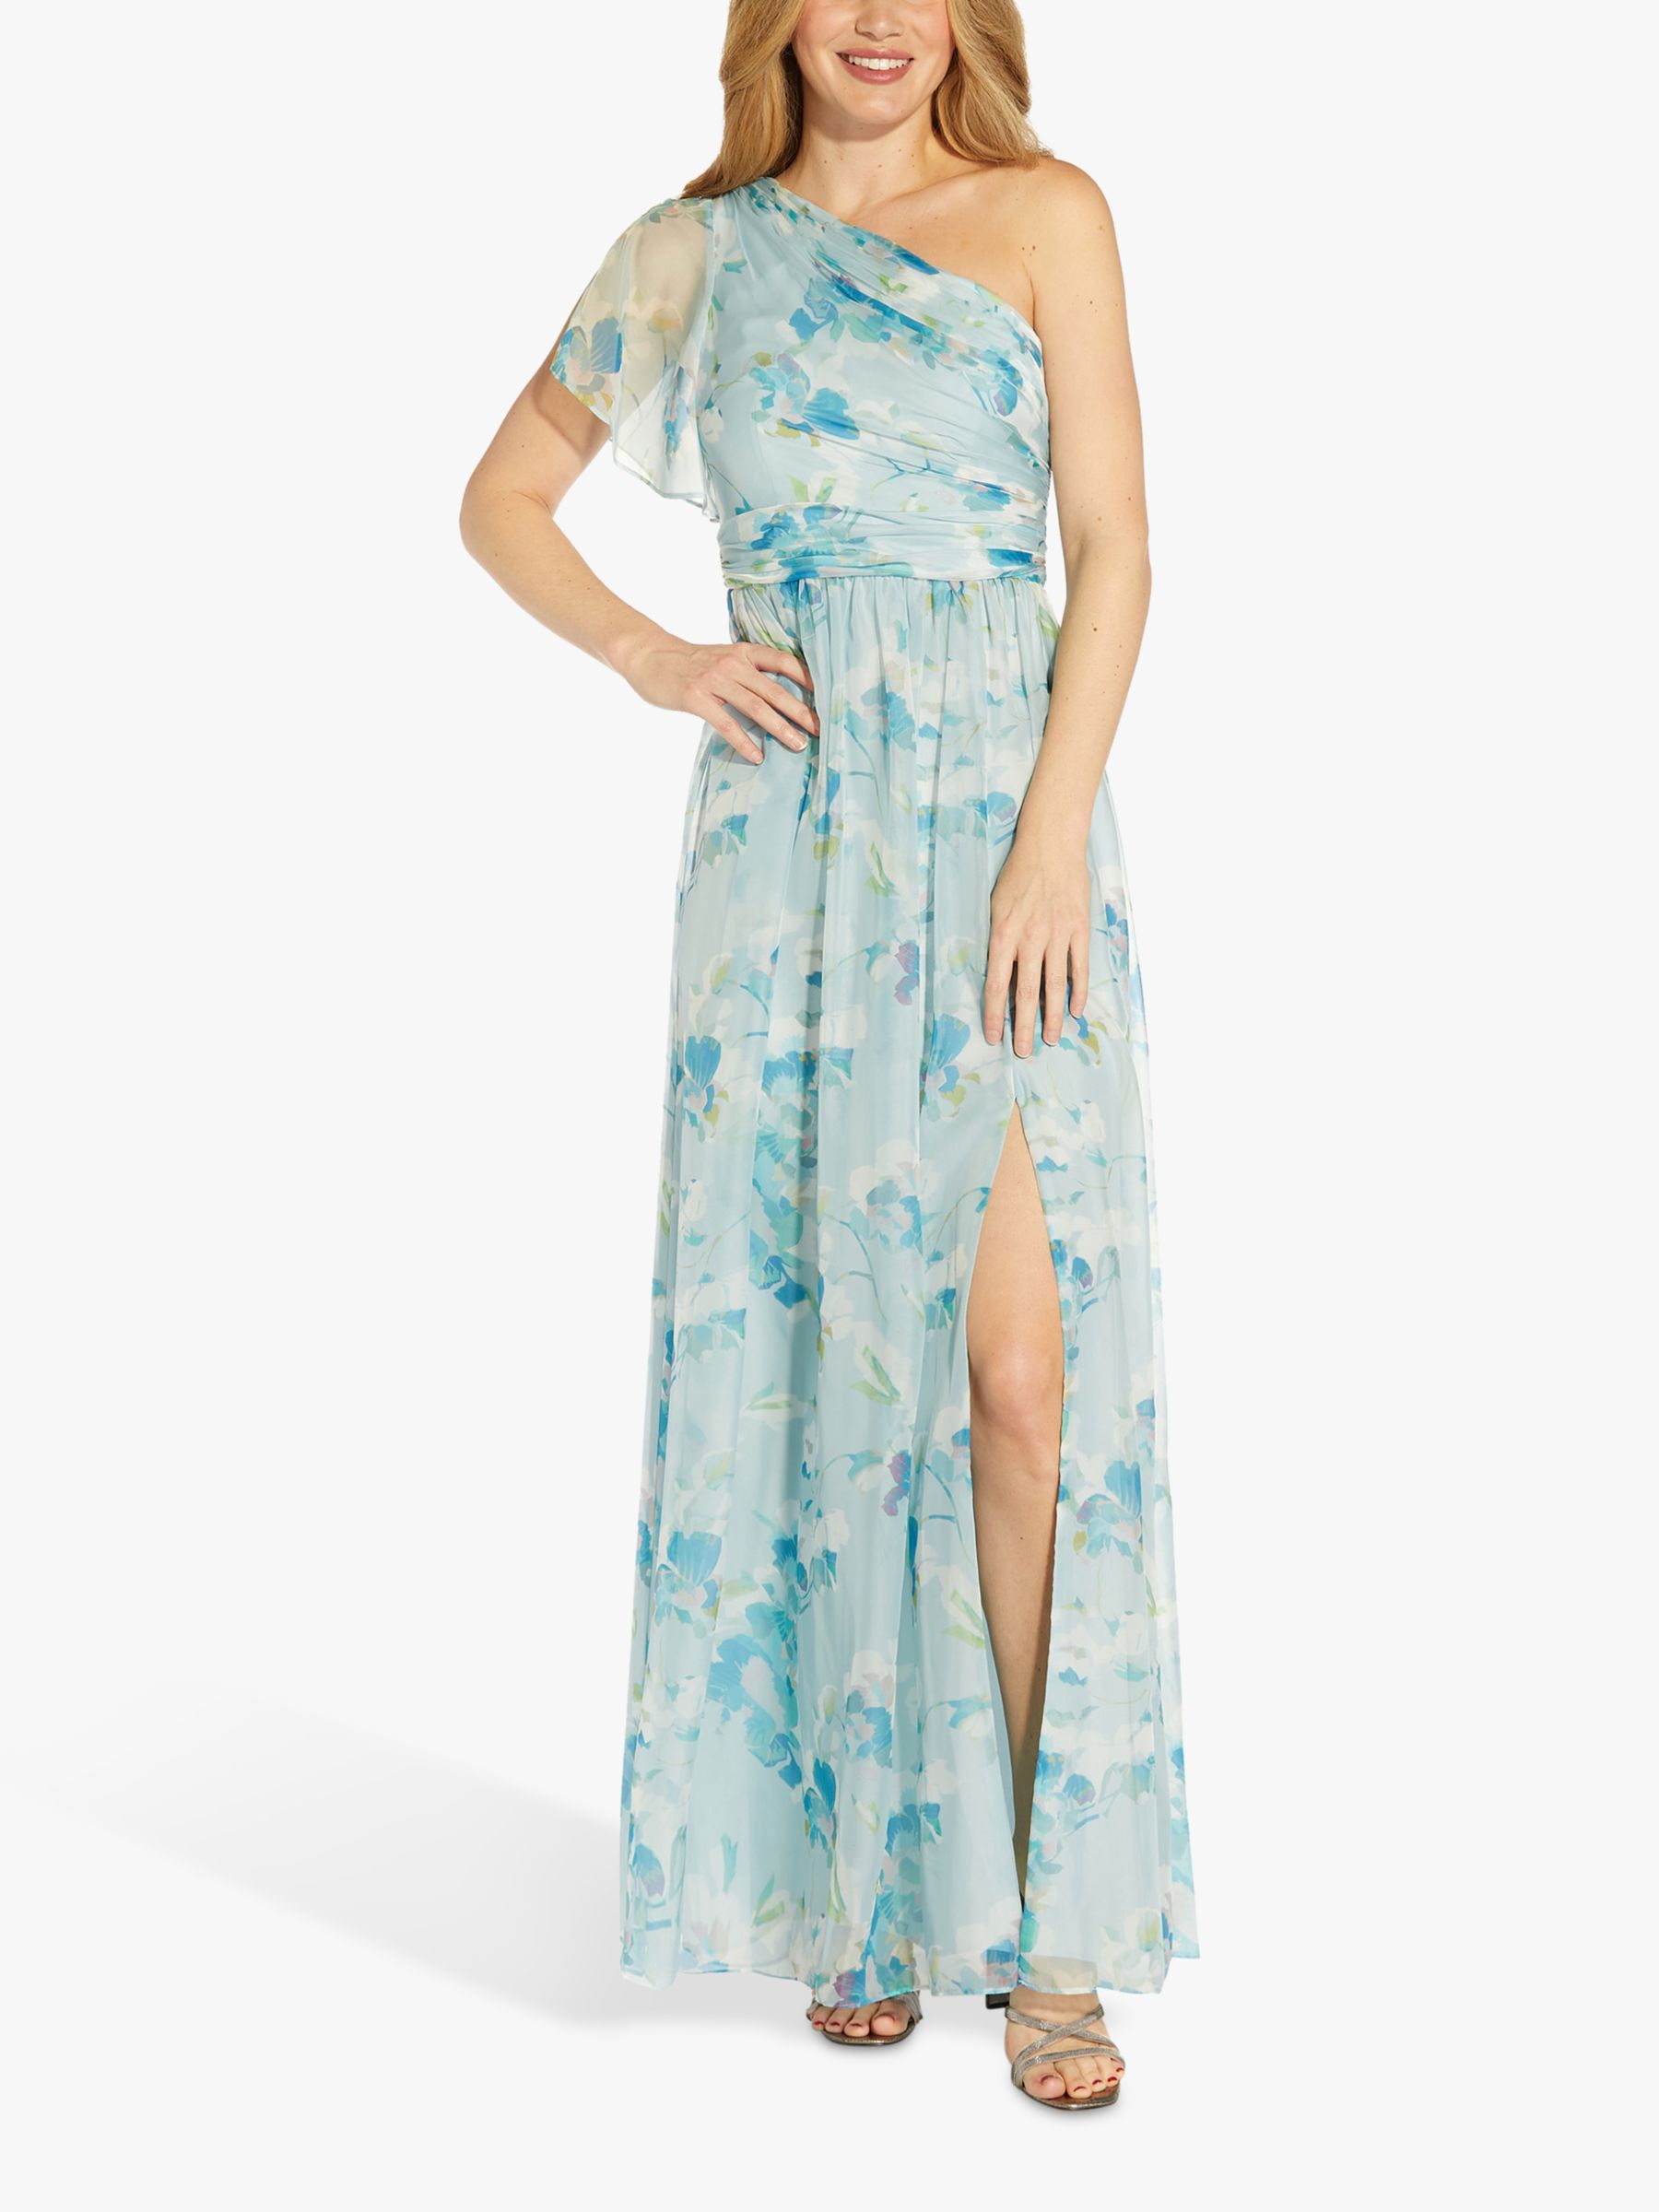 Adrianna Papell Floral Print One Shoulder Dress, Spring Green/Multi at John Lewis & Partners